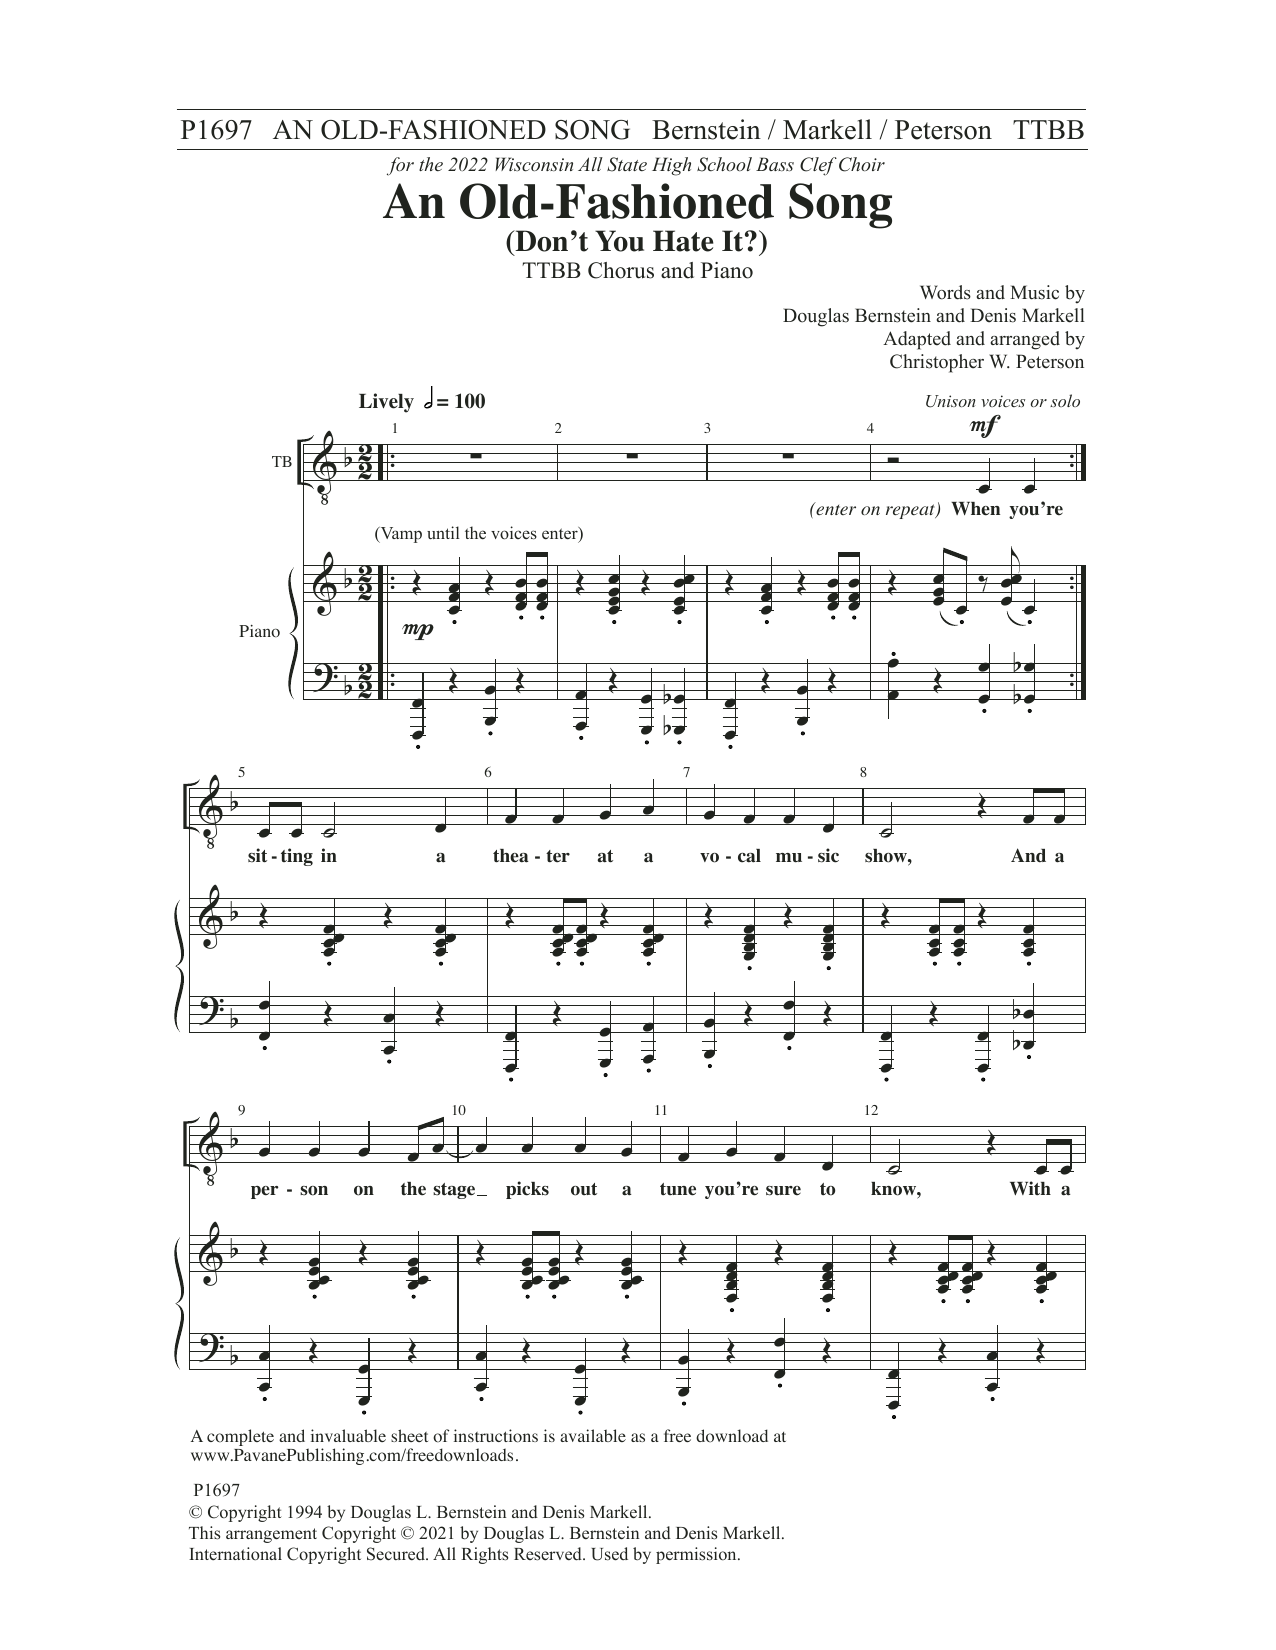 An Old-Fashioned Song (Don't You Hate It?) (arr. Christopher Peterson) (TTBB Choir) von Douglas Bernstein and Denis Markell